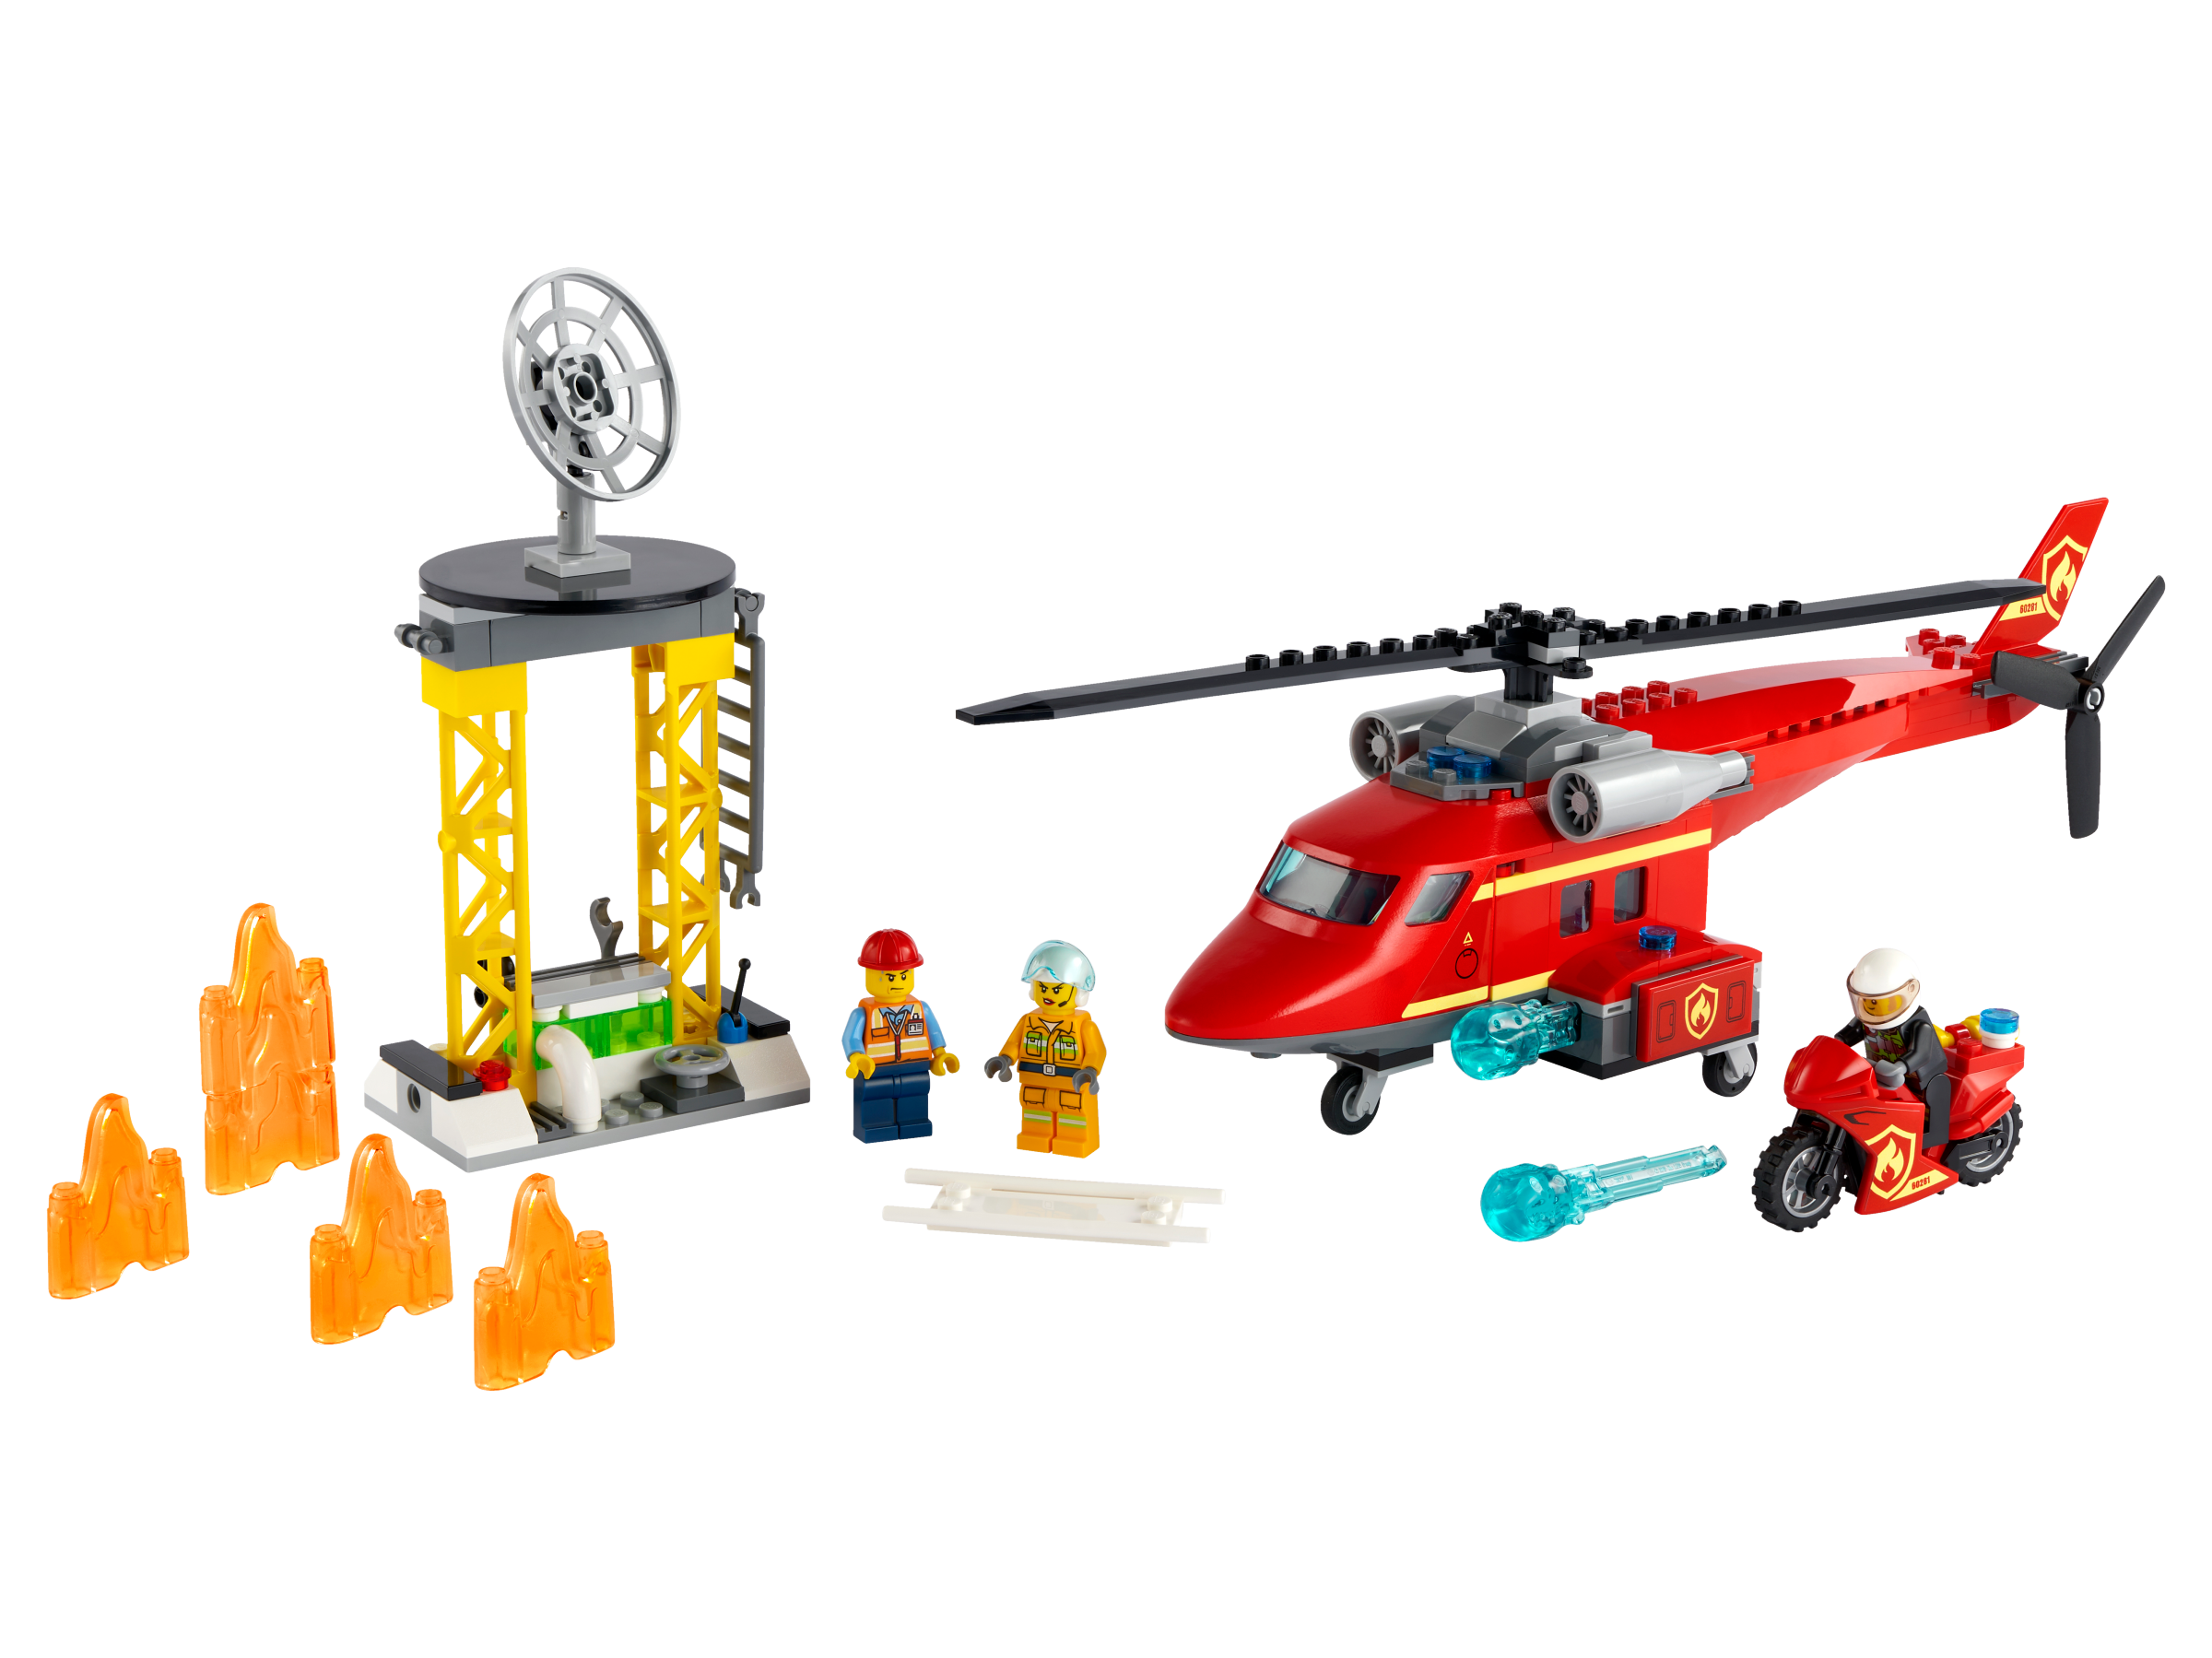 Lego 60281 Fire Rescue Helicopter